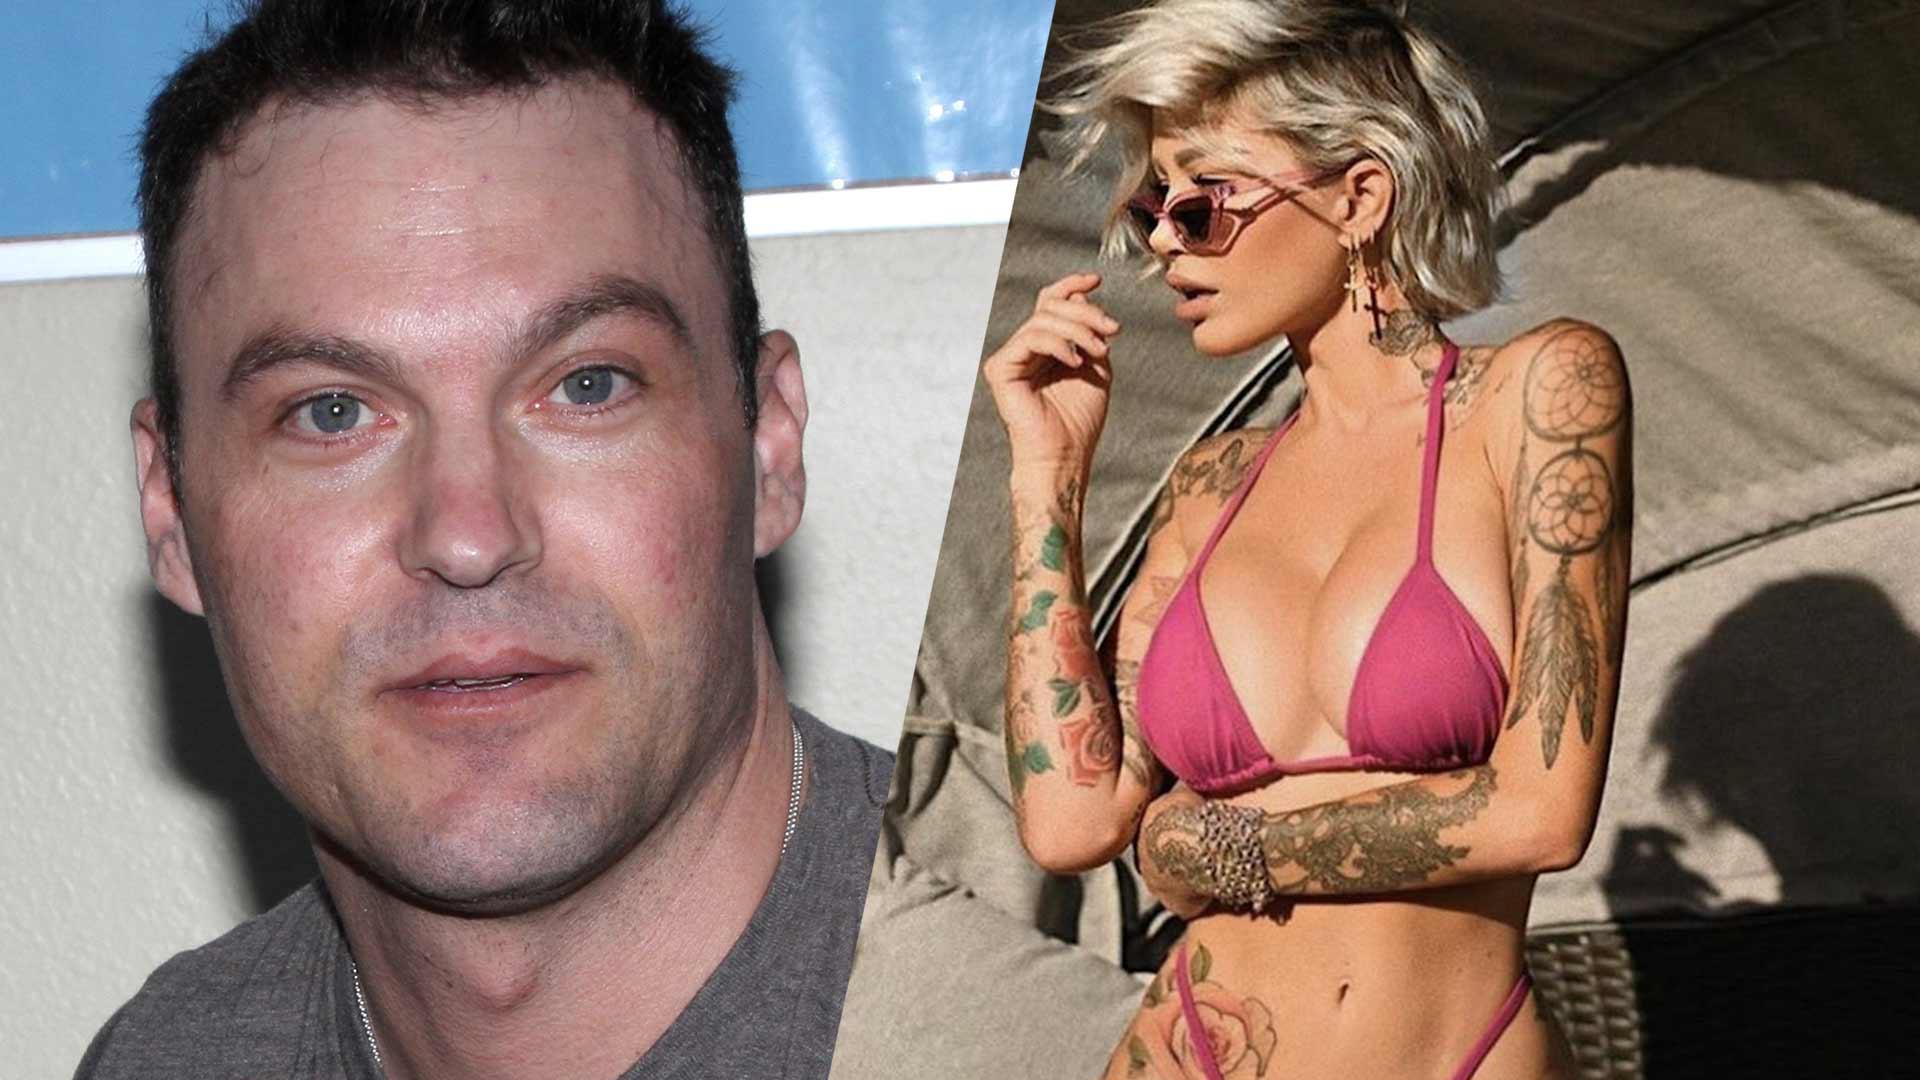 Brian Austin Green 'splits' with Tina Louise a month of dating